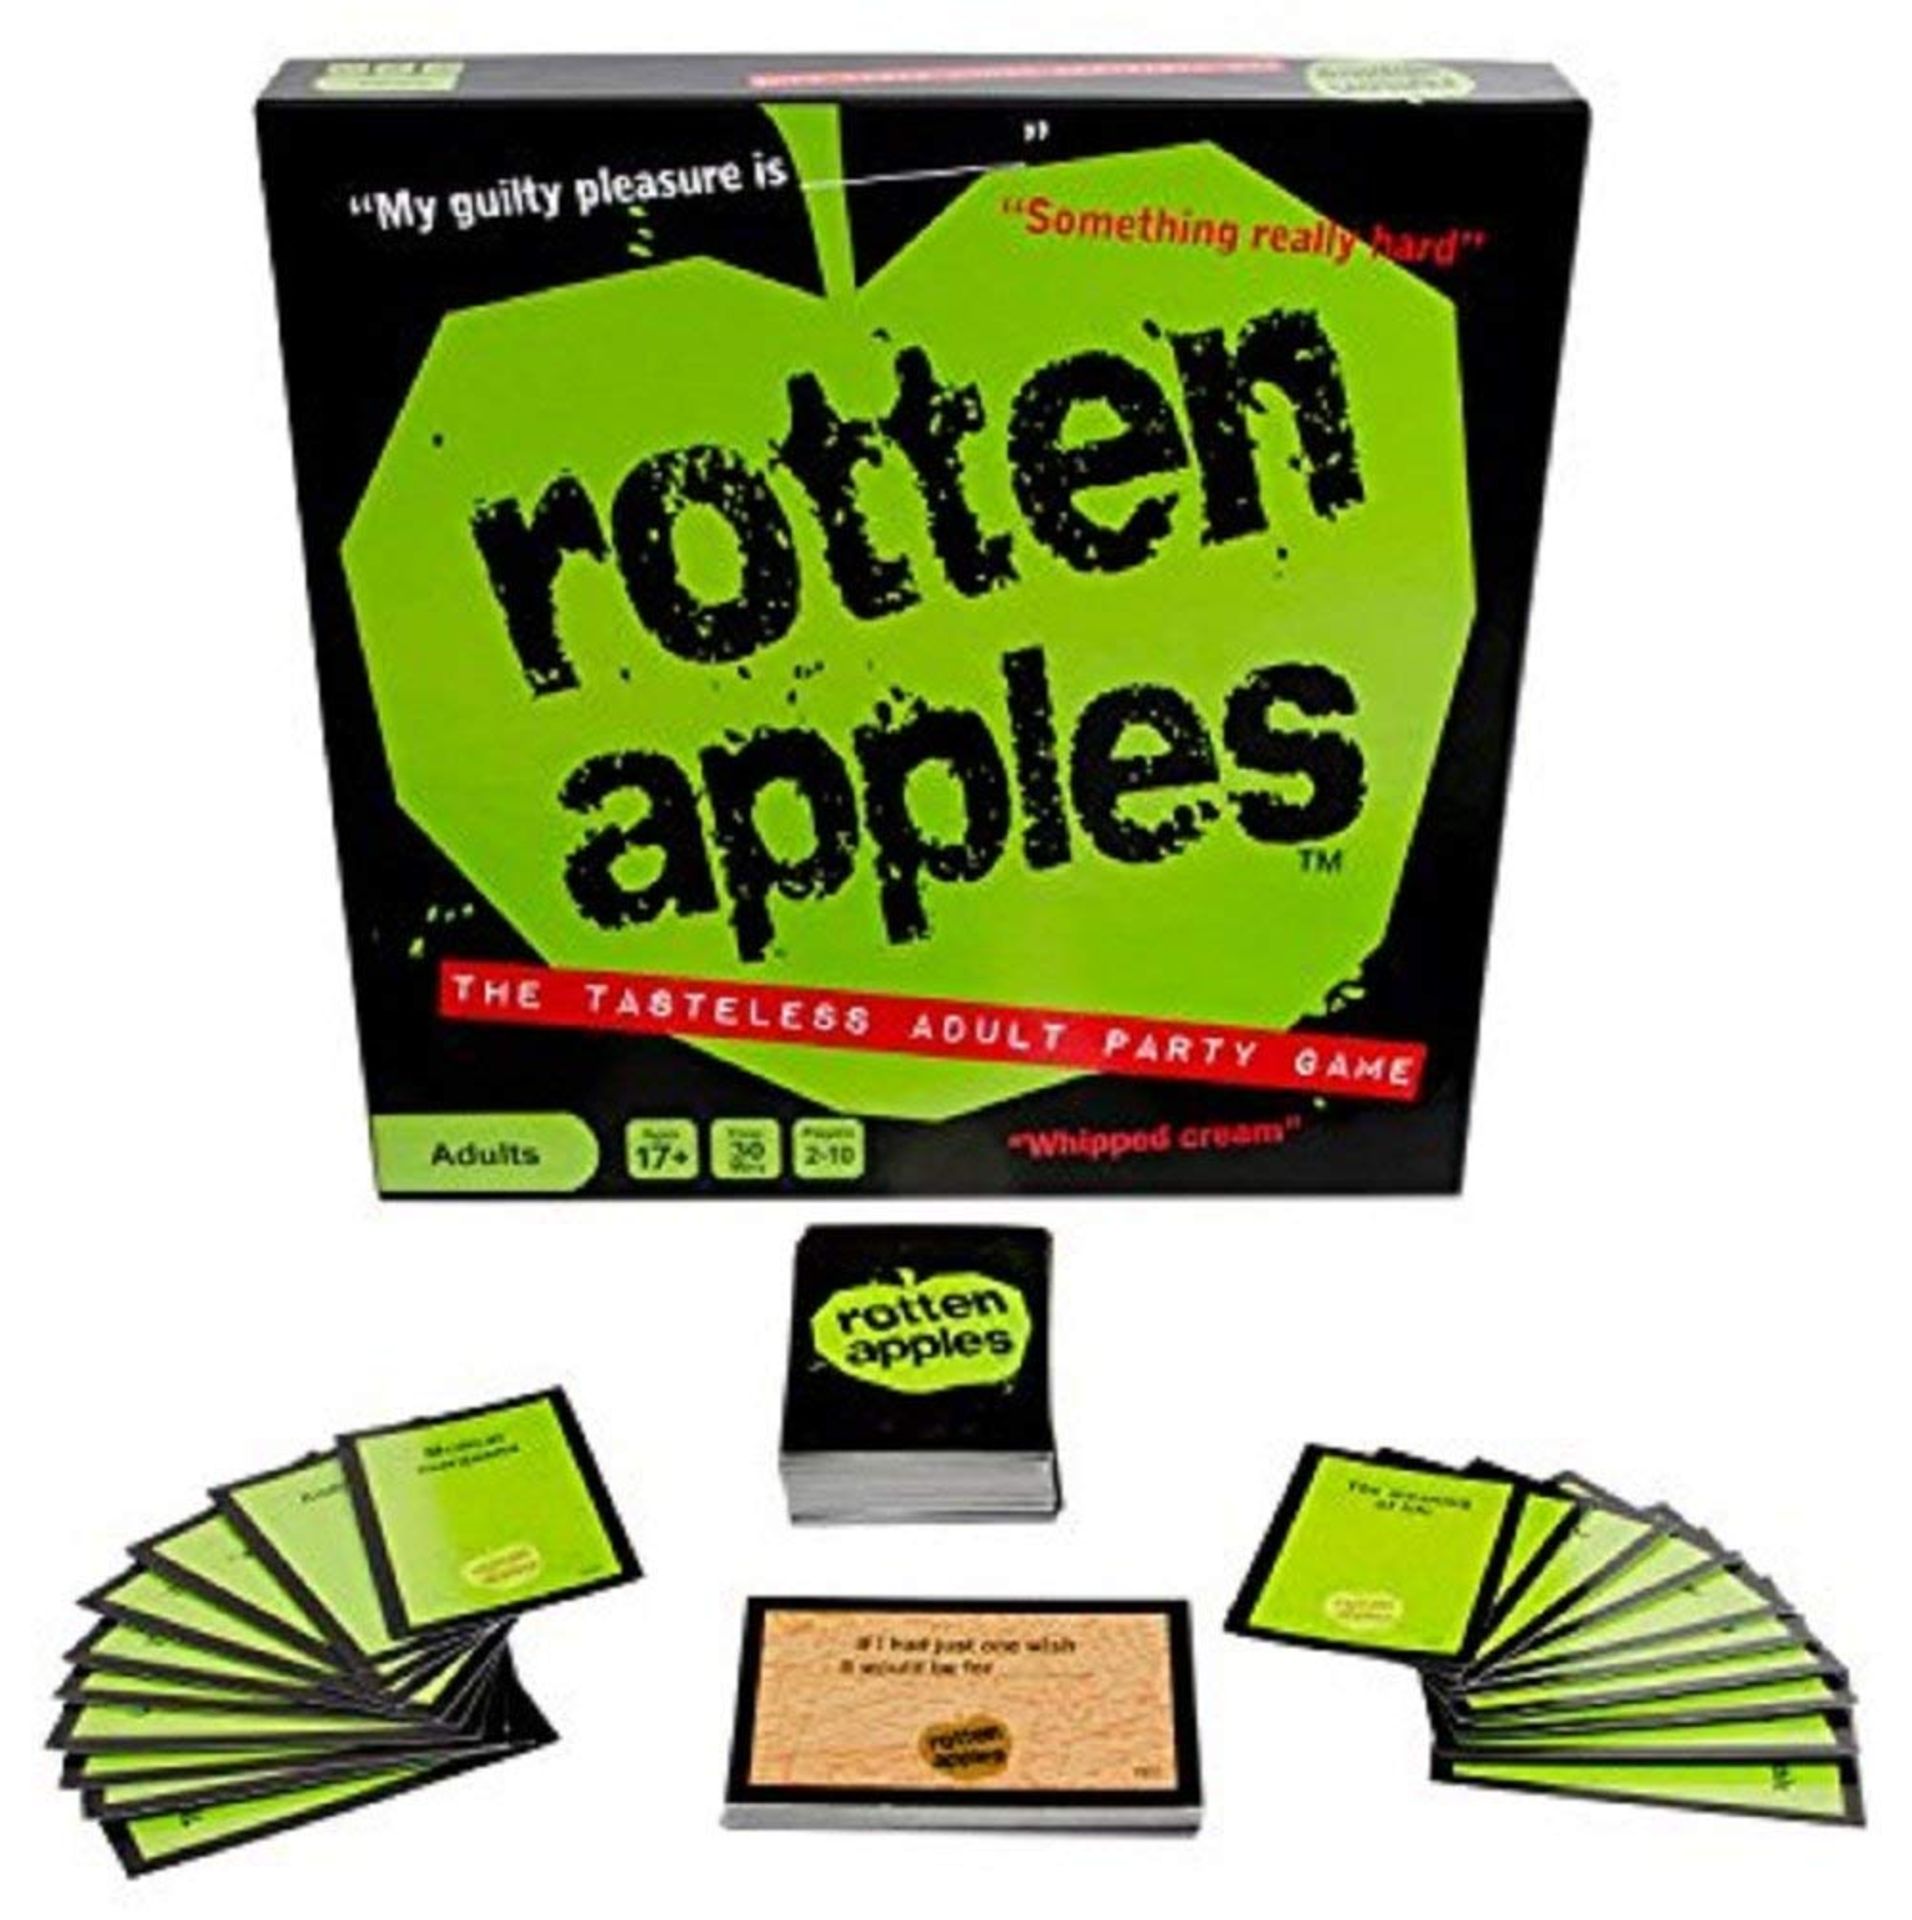 576 x Rotten Apples The Tasteless Adult Party Game 2-10 Players 30 Mins Play Time | RRP £5,040 - Image 2 of 2